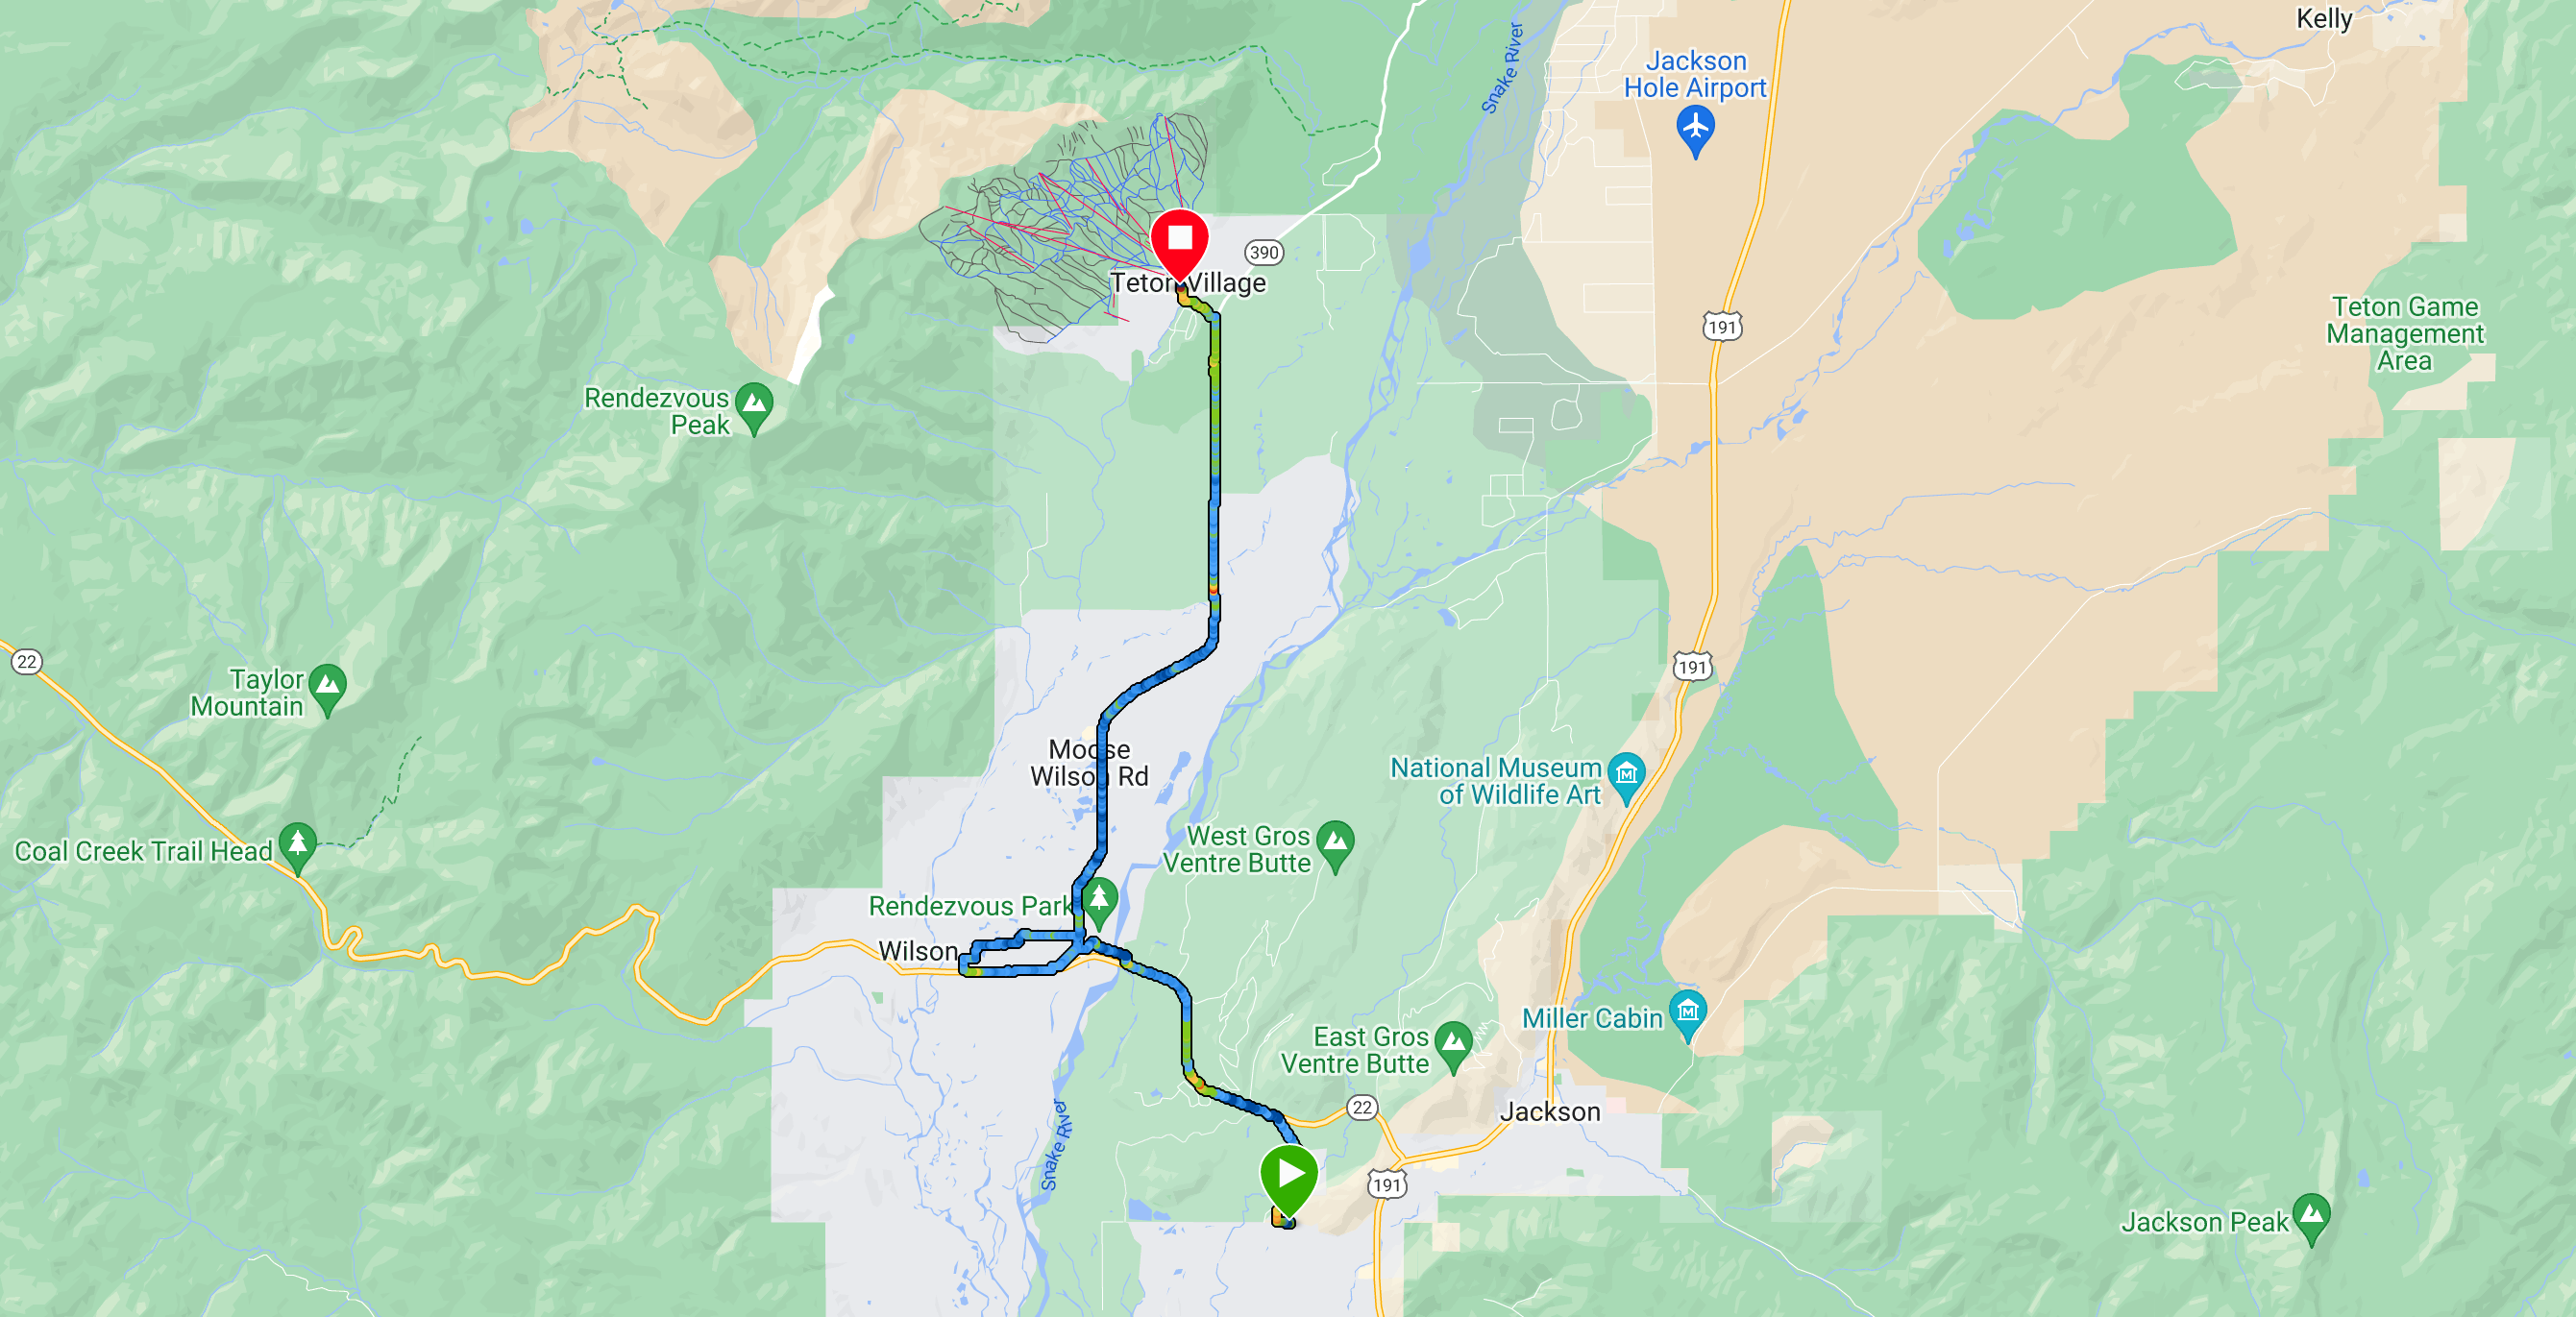 A screenshot of a Google map, showing the route of the Hole Half Marathon, from Jackson to Teton Village.